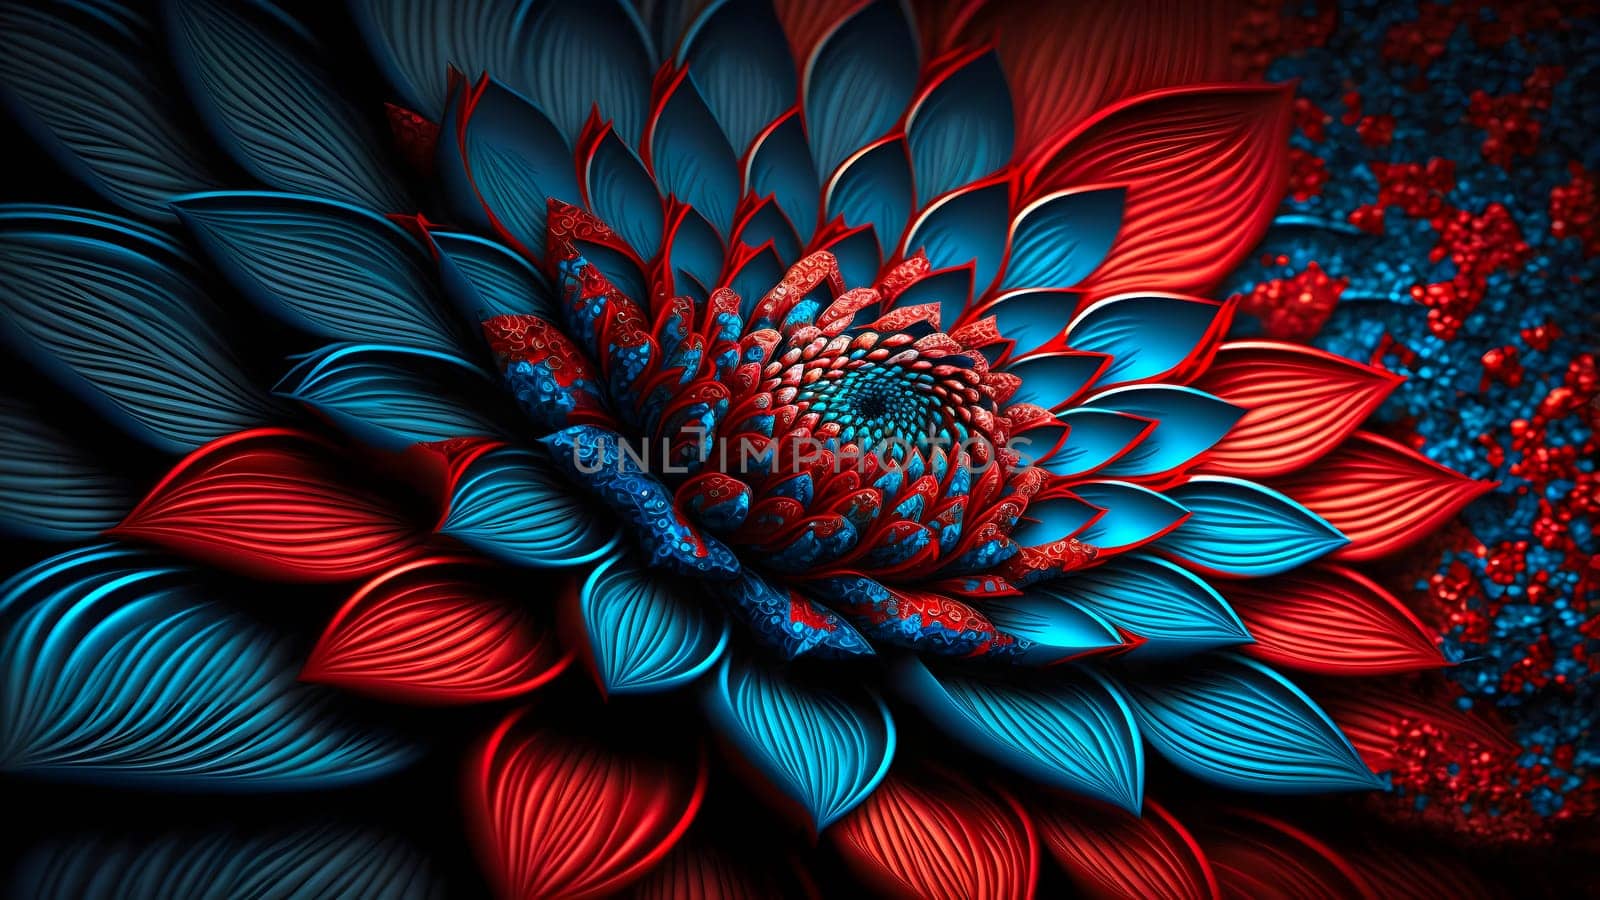 closeup full-frame background of red and blue petal flower, neural network generated art by z1b